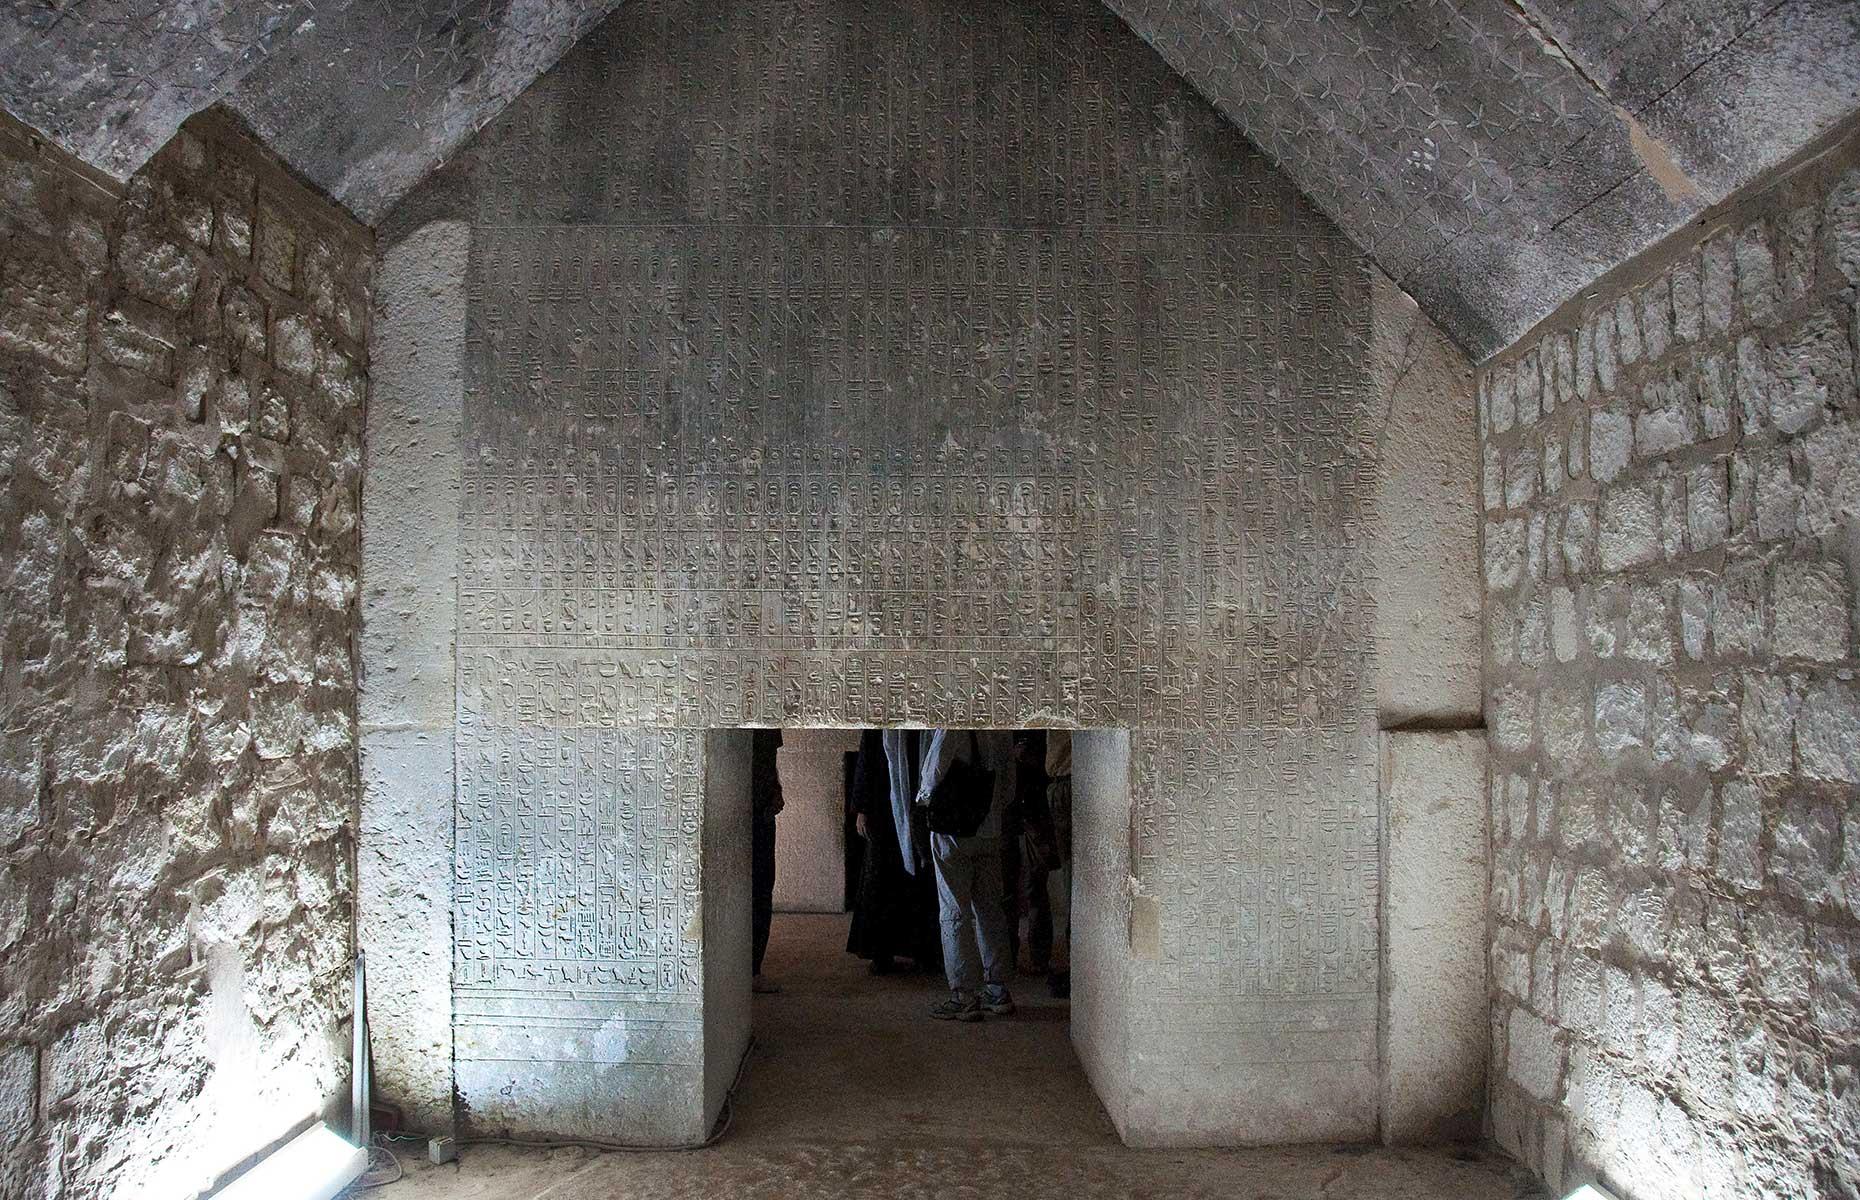 <p>Teti's burial chamber was located beneath the pyramid, along with his well-preserved basalt sarcophagus. Like the Unas Pyramid, the Teti Pyramid's walls <a href="http://www.ancient-egypt.org/history/old-kingdom/6th-dynasty/teti/pyramid-complex-of-teti/pyramid-of-teti.html">were also adorned with pyramid texts</a>. These funerary texts first appeared in the Fifth Dynasty of the Old Kingdom (2465-2323 BC), and were succeeded by so-called 'coffin texts' during the Middle Kingdom (inscriptions found inside sarcophagi that tended to focus on the underworld). Both went on to influence the New Kingdom's Book of the Dead.</p>  <p><a href="https://www.loveexploring.com/galleries/77693/grave-travel-where-your-favourite-stars-are-laid-to-rest?page=1"><strong>These are where your favourite stars are laid to rest</strong></a></p>